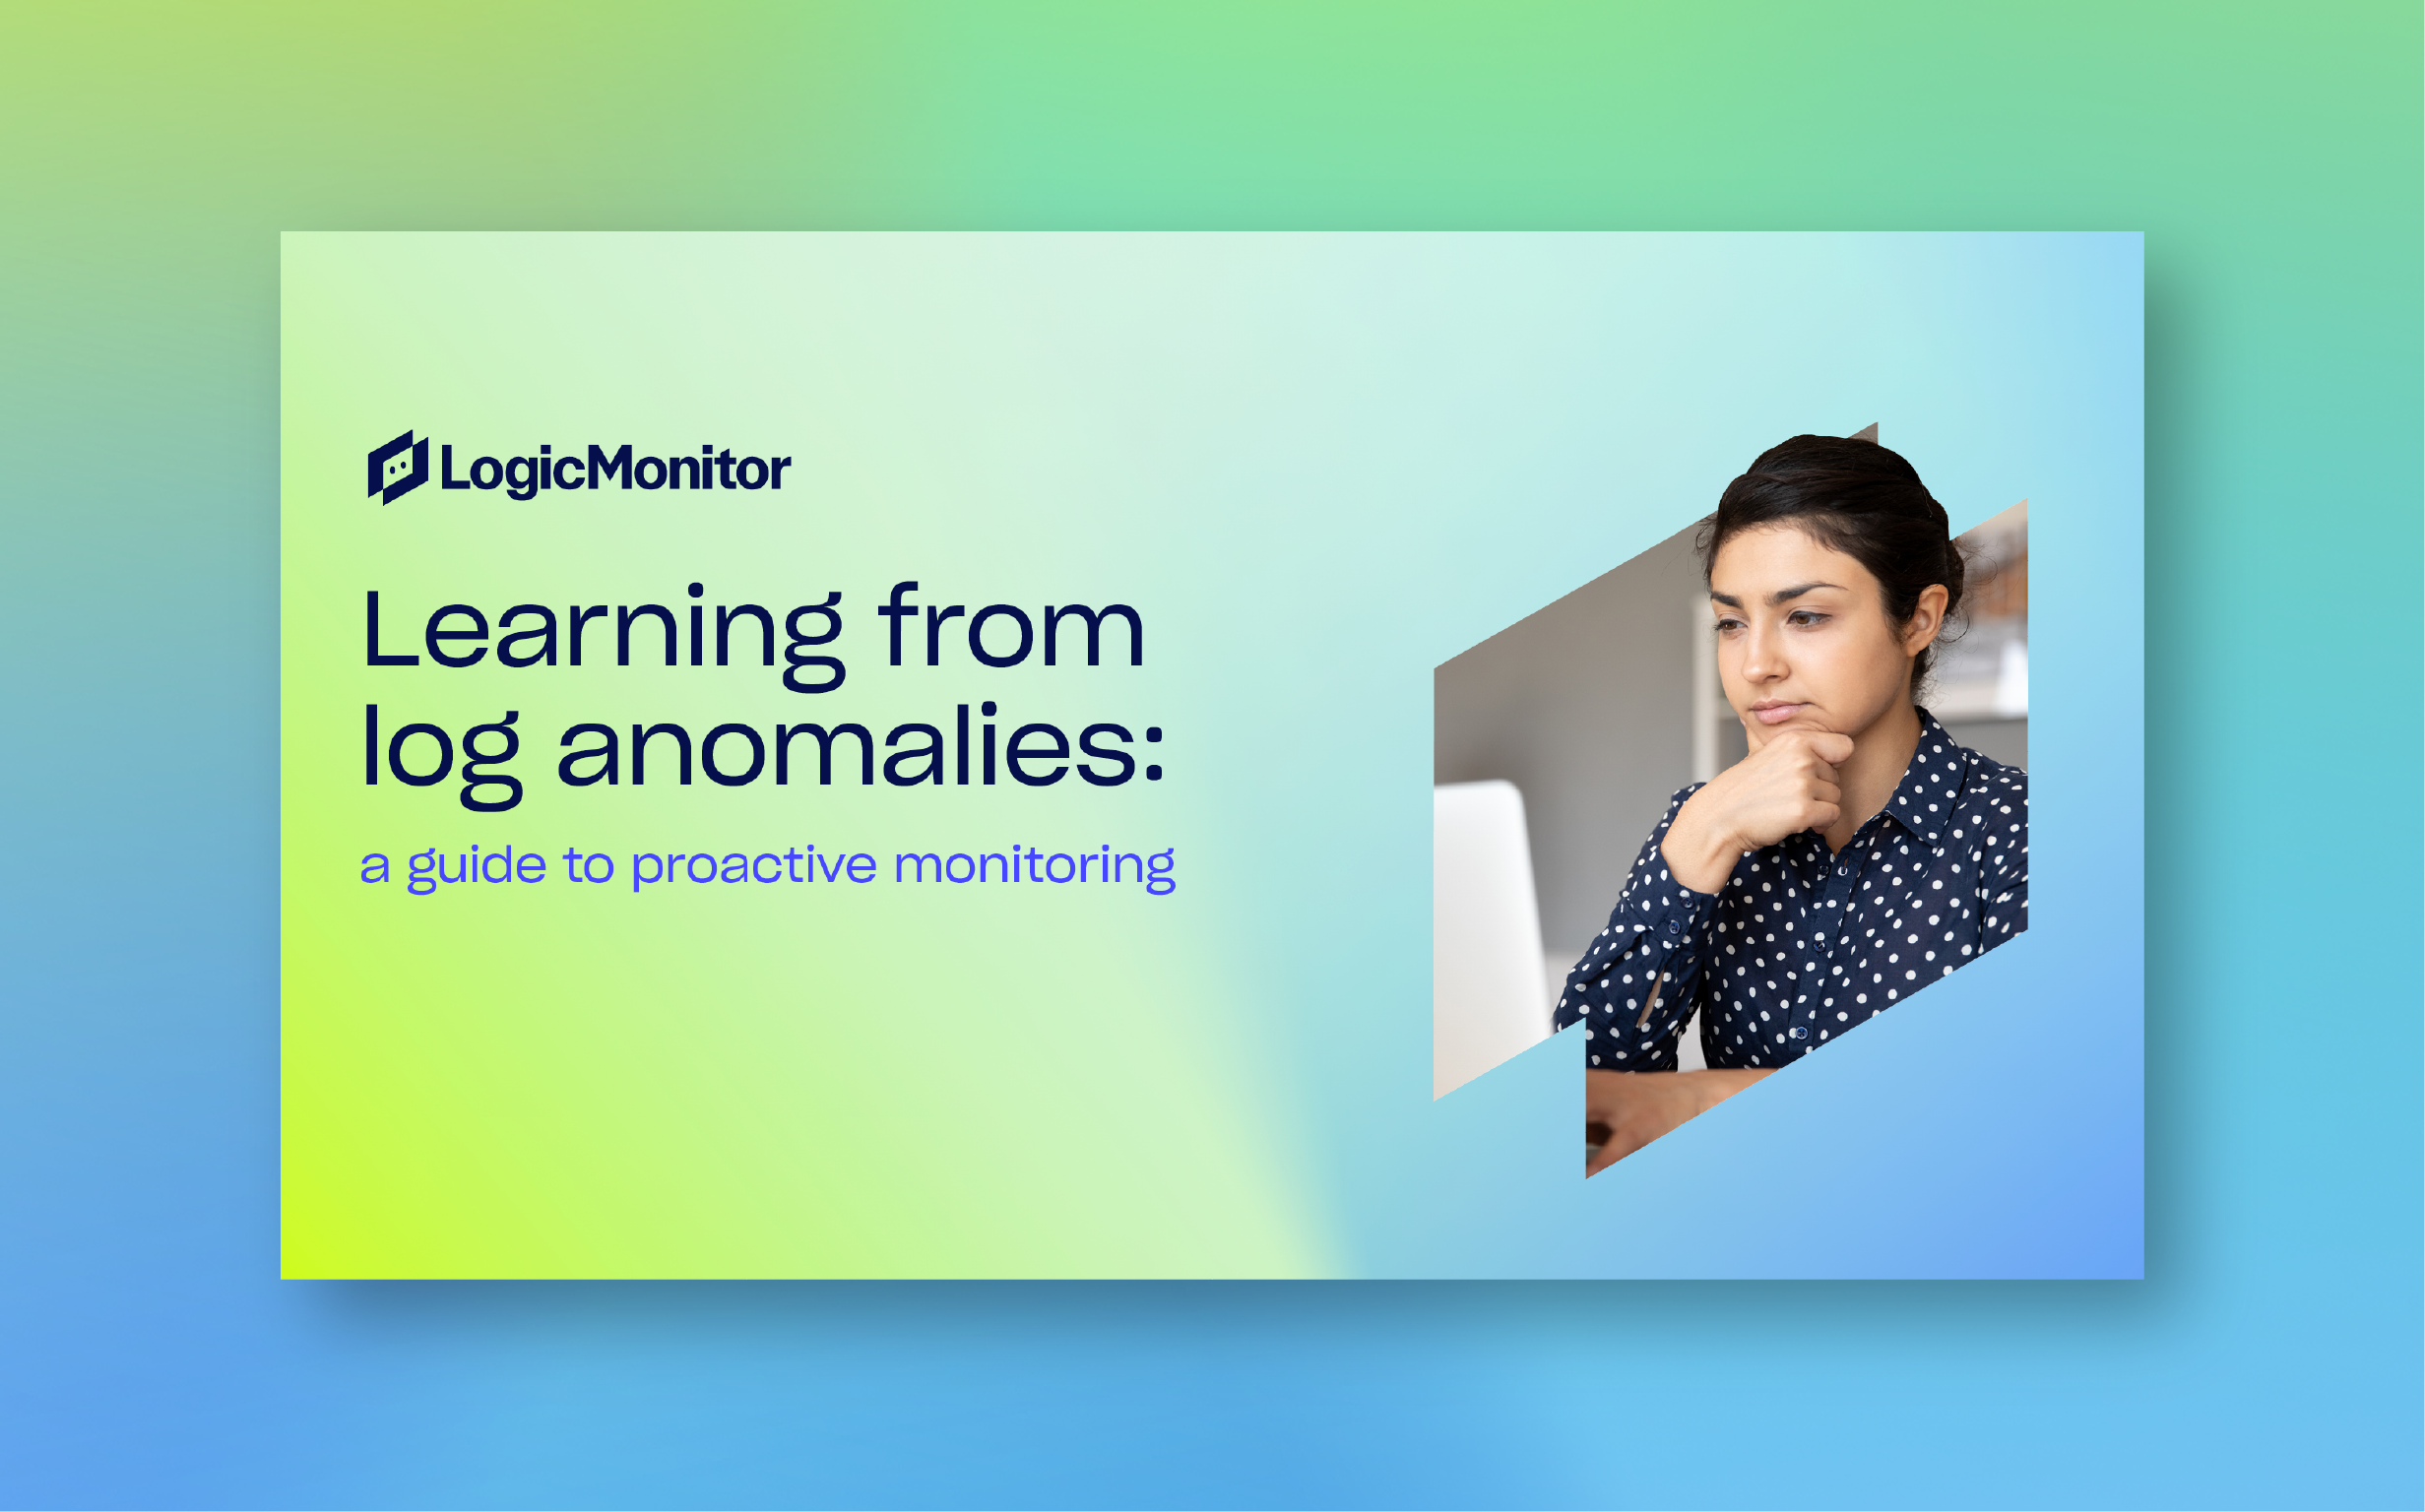 Learning from log anomalies: a guide to proactive monitoring